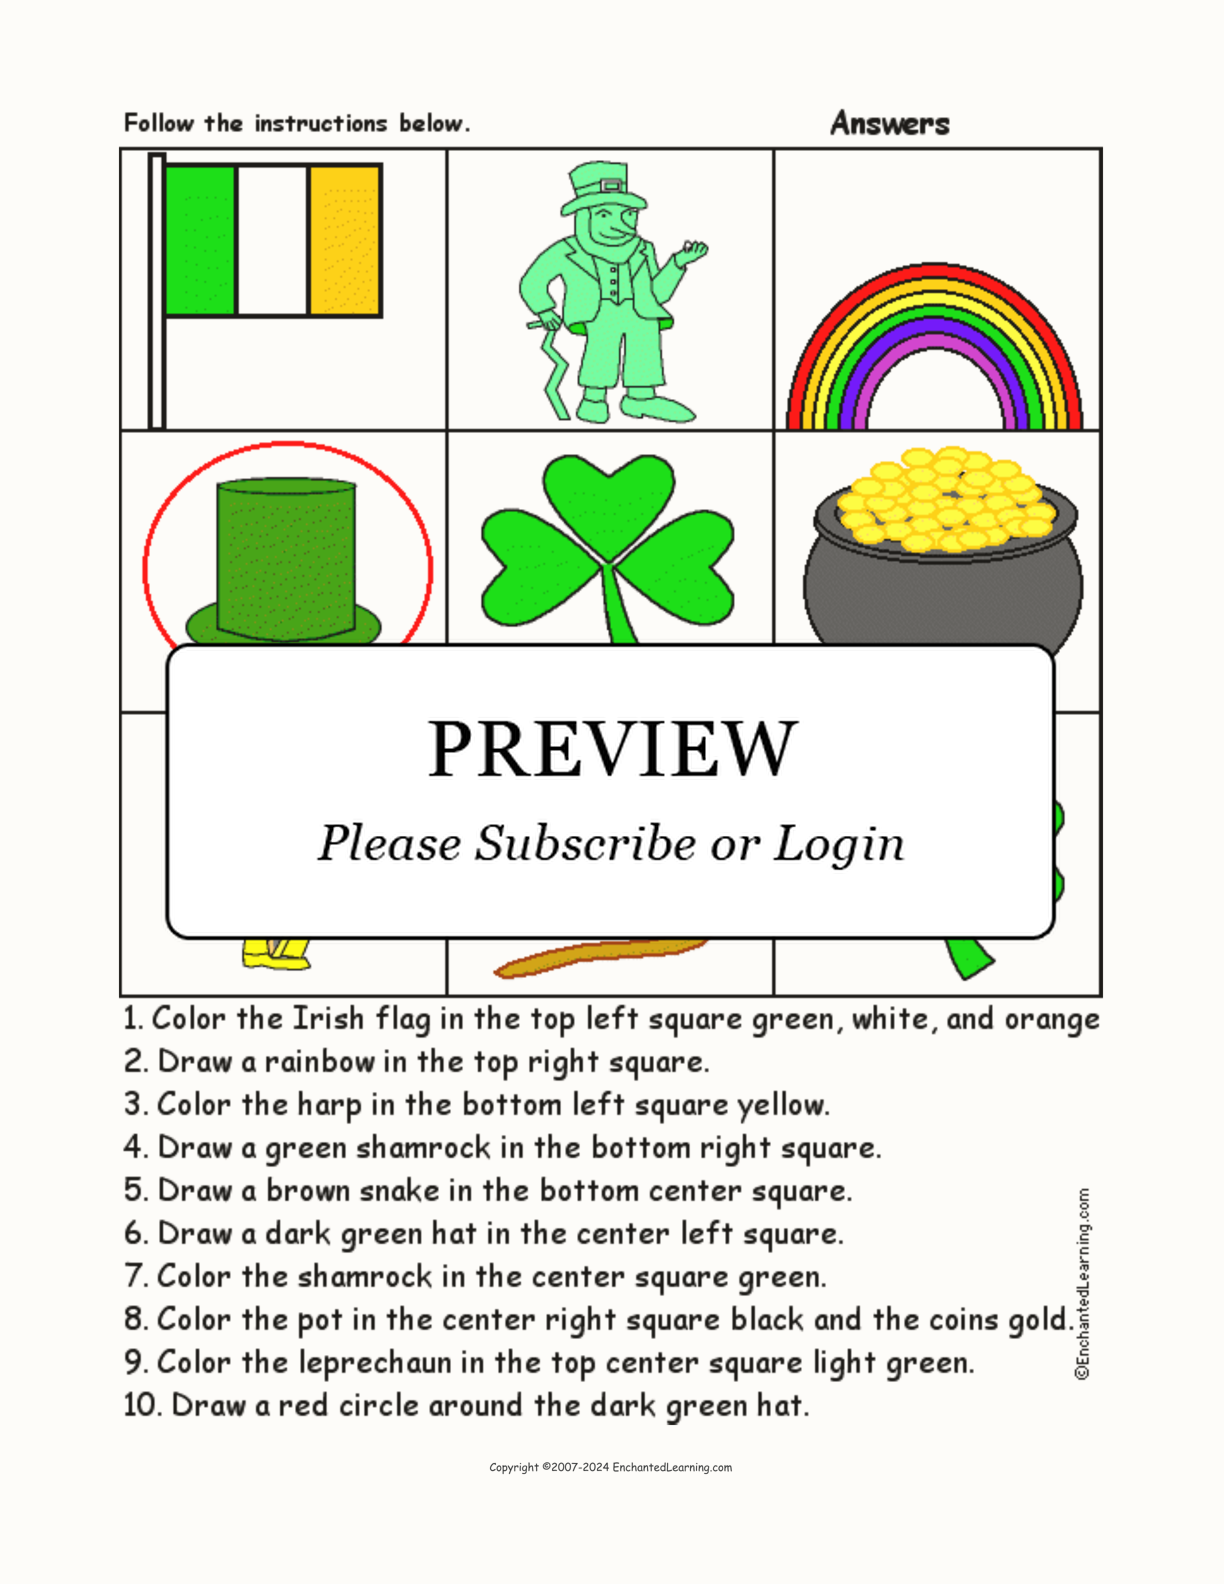 St. Patrick's Day - Follow the Instructions interactive worksheet page 2